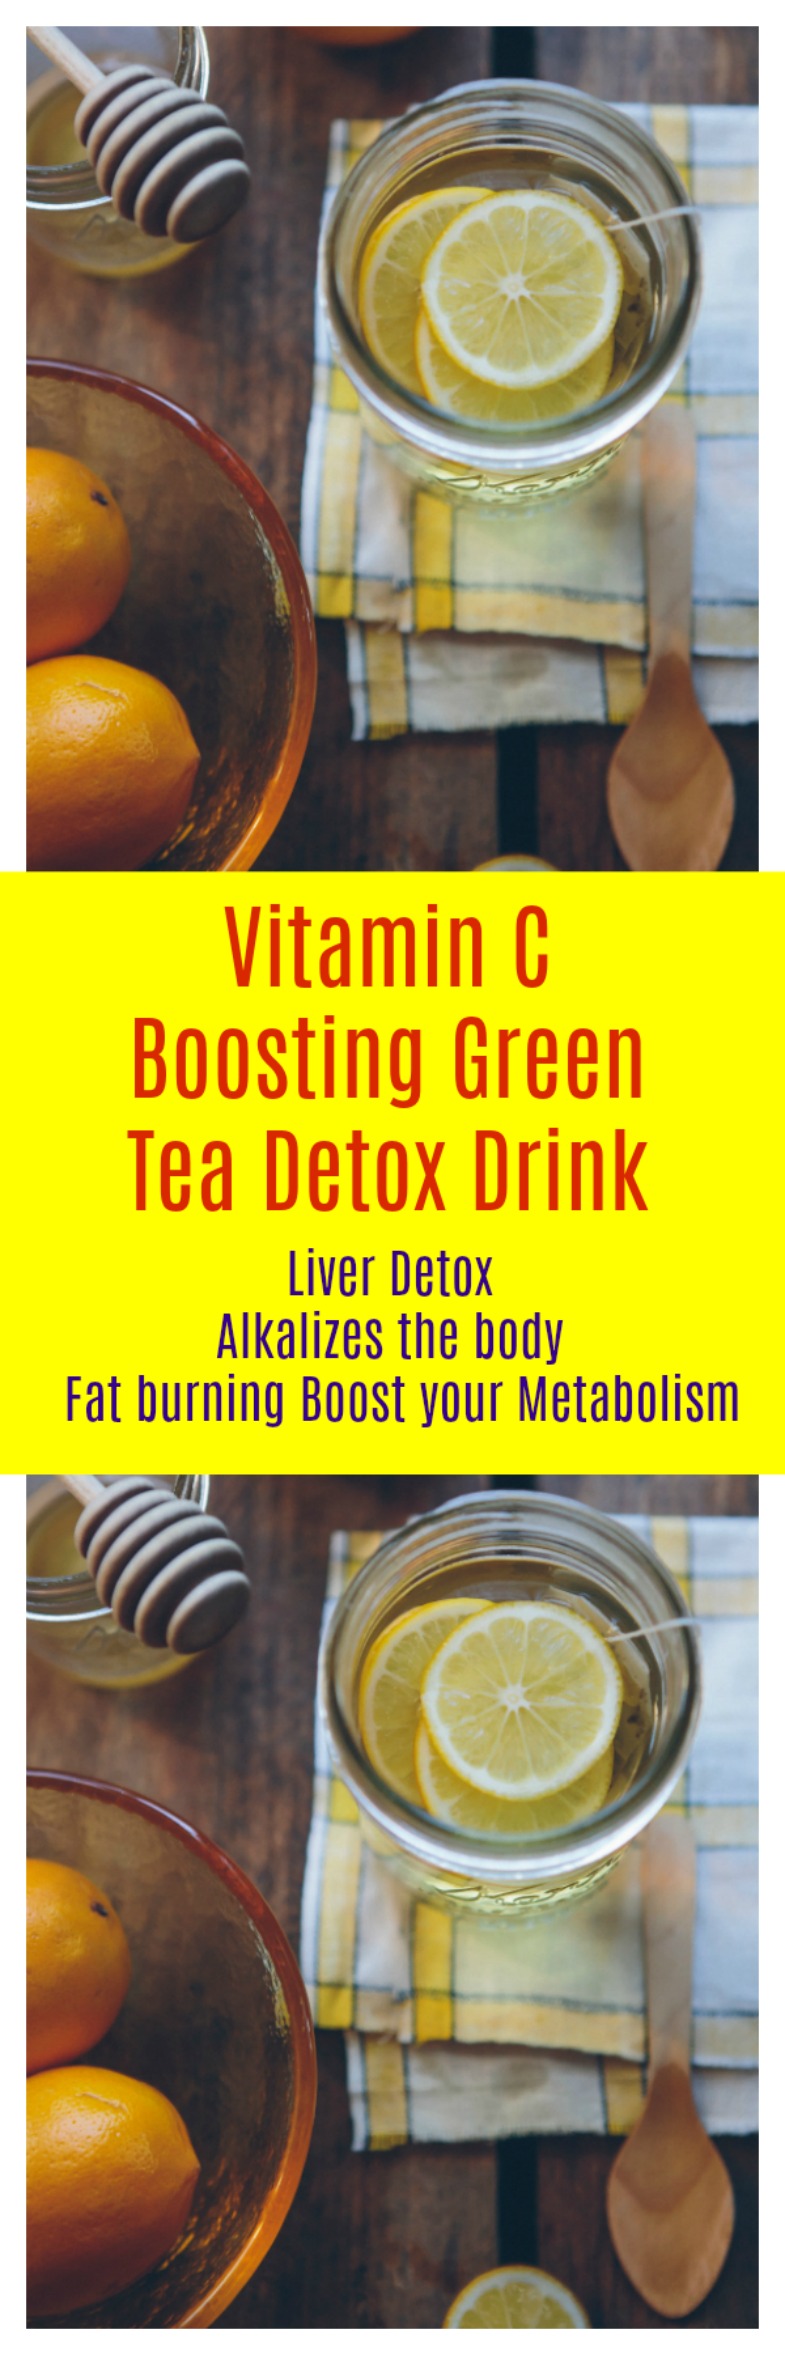 Vitamin C Boosting Green Tea Detox Drink is great for your overall health and it is loaded with antioxidants that you need each day.